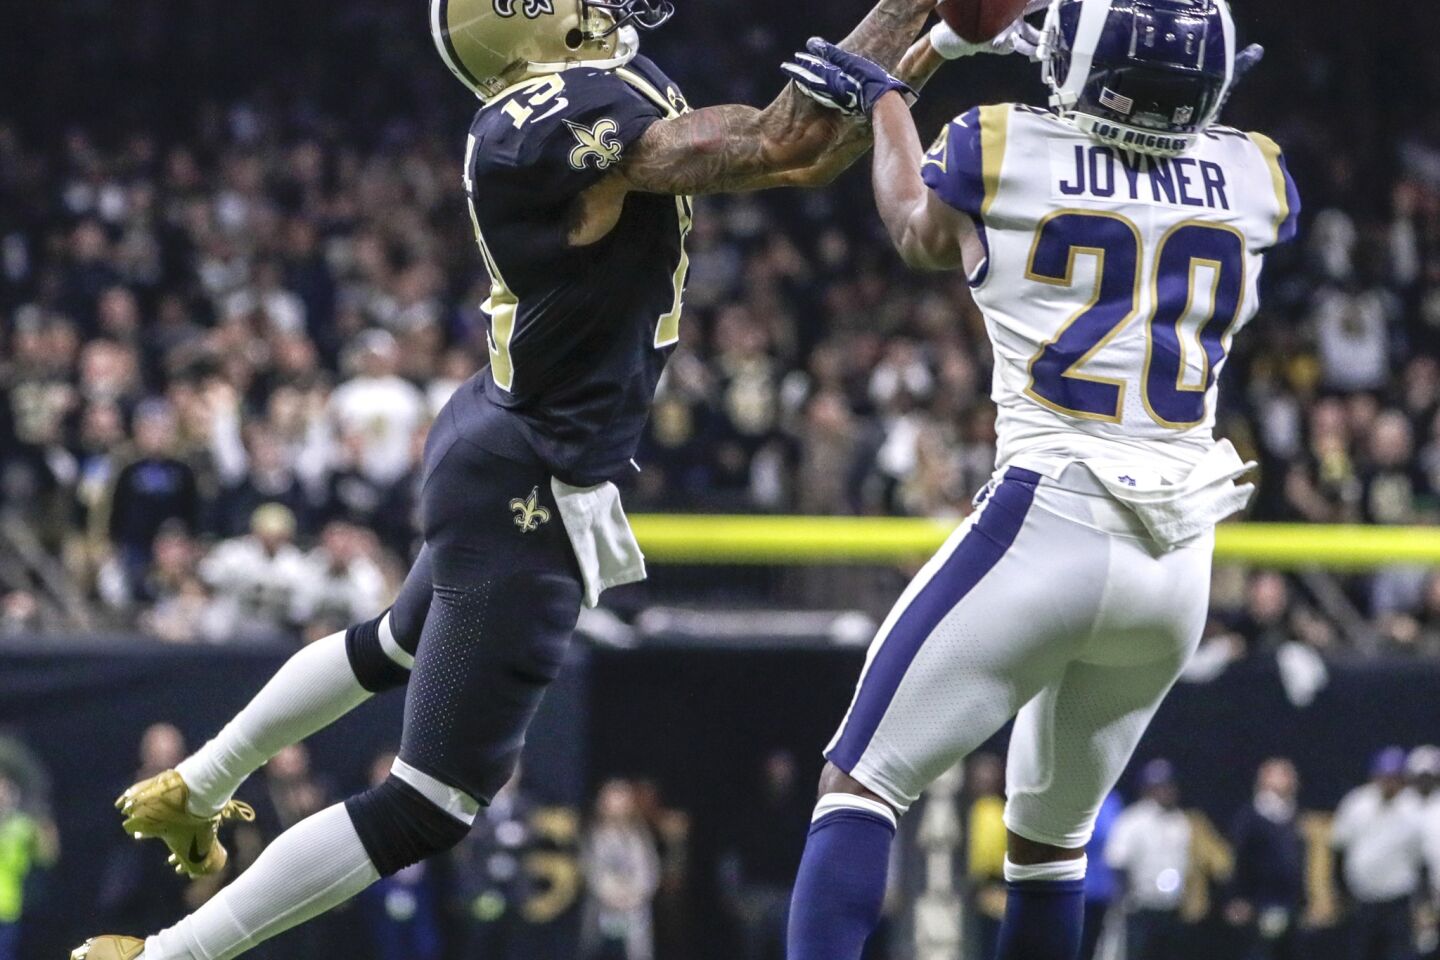 New Orleans Saints receiver Ted Ginn Jr. pulls down a 43-yard pass in front of Rams safety Lamarcus Joyner late in the fourth quarter in the NFC Championship at the Superdome.